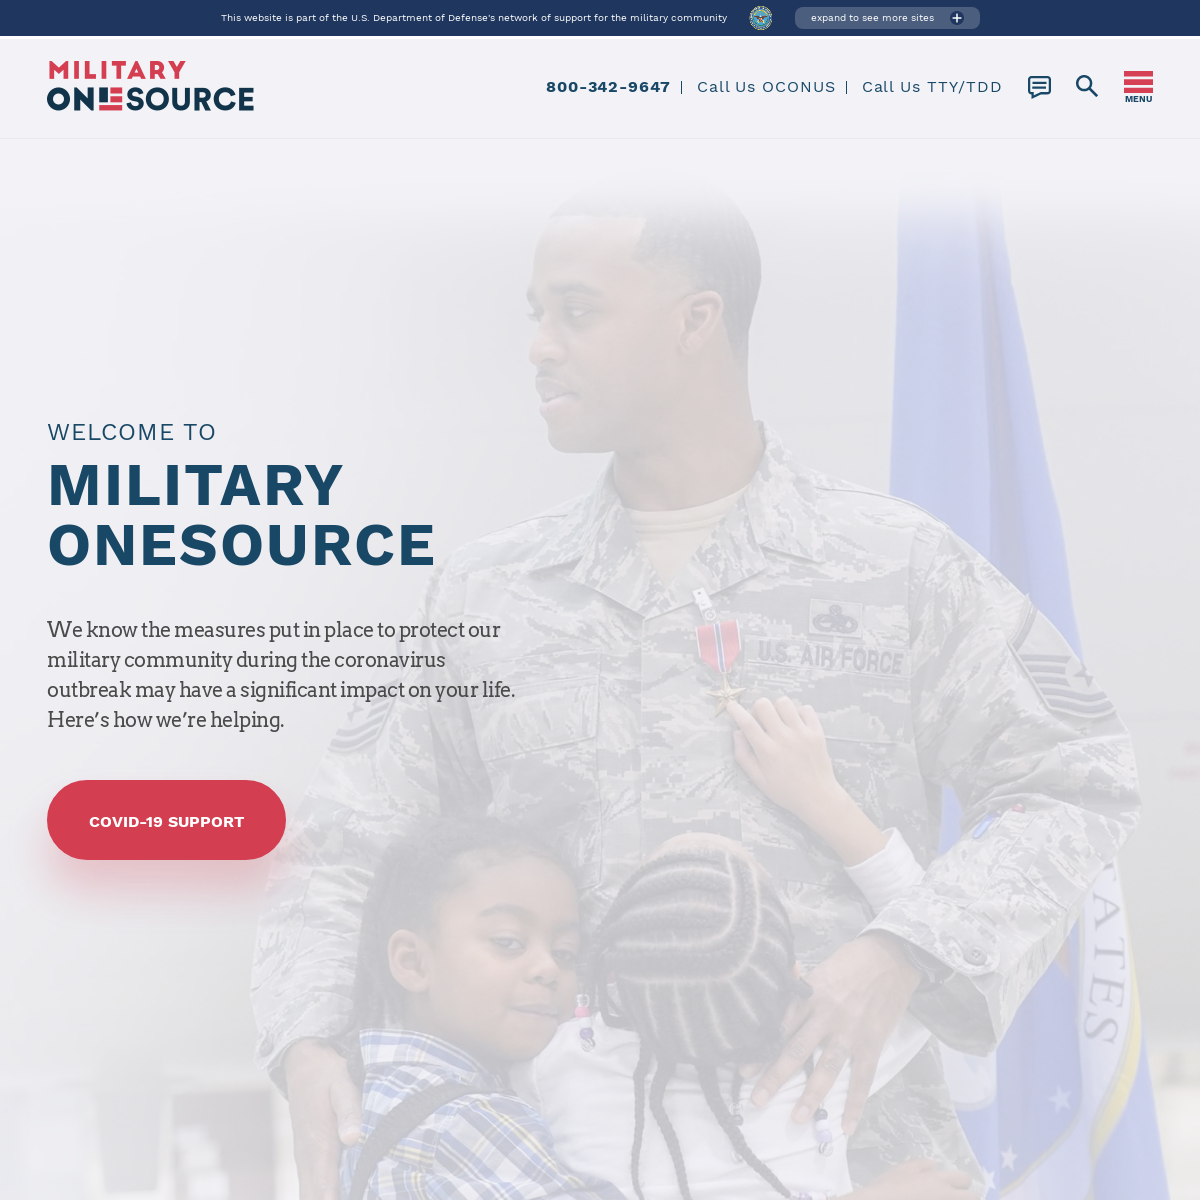 A complete backup of militaryonesource.mil